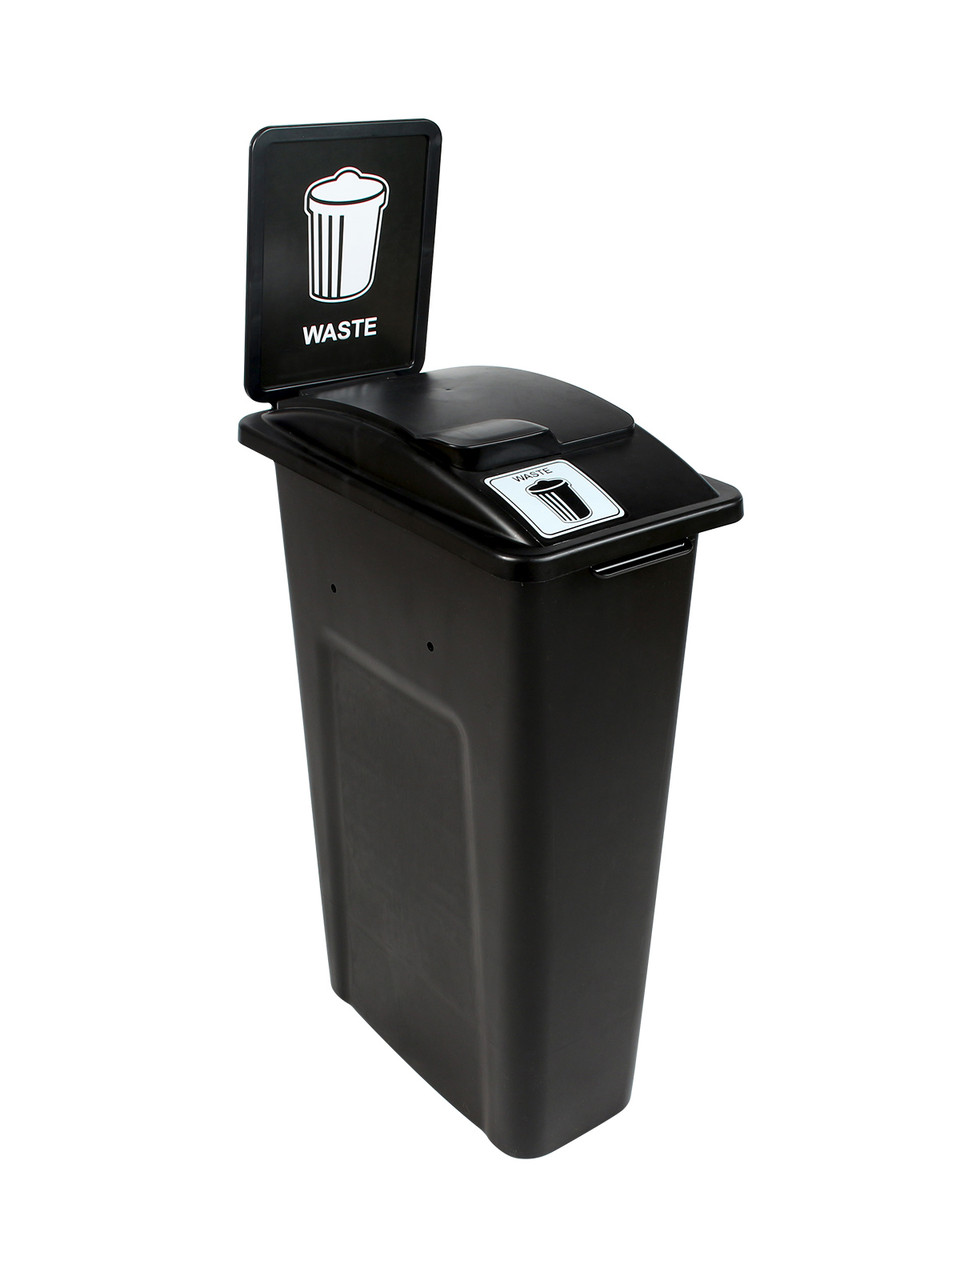 23 Gallon Black Skinny Simple Sort Waste Can with Sign (Waste, Lift Top)